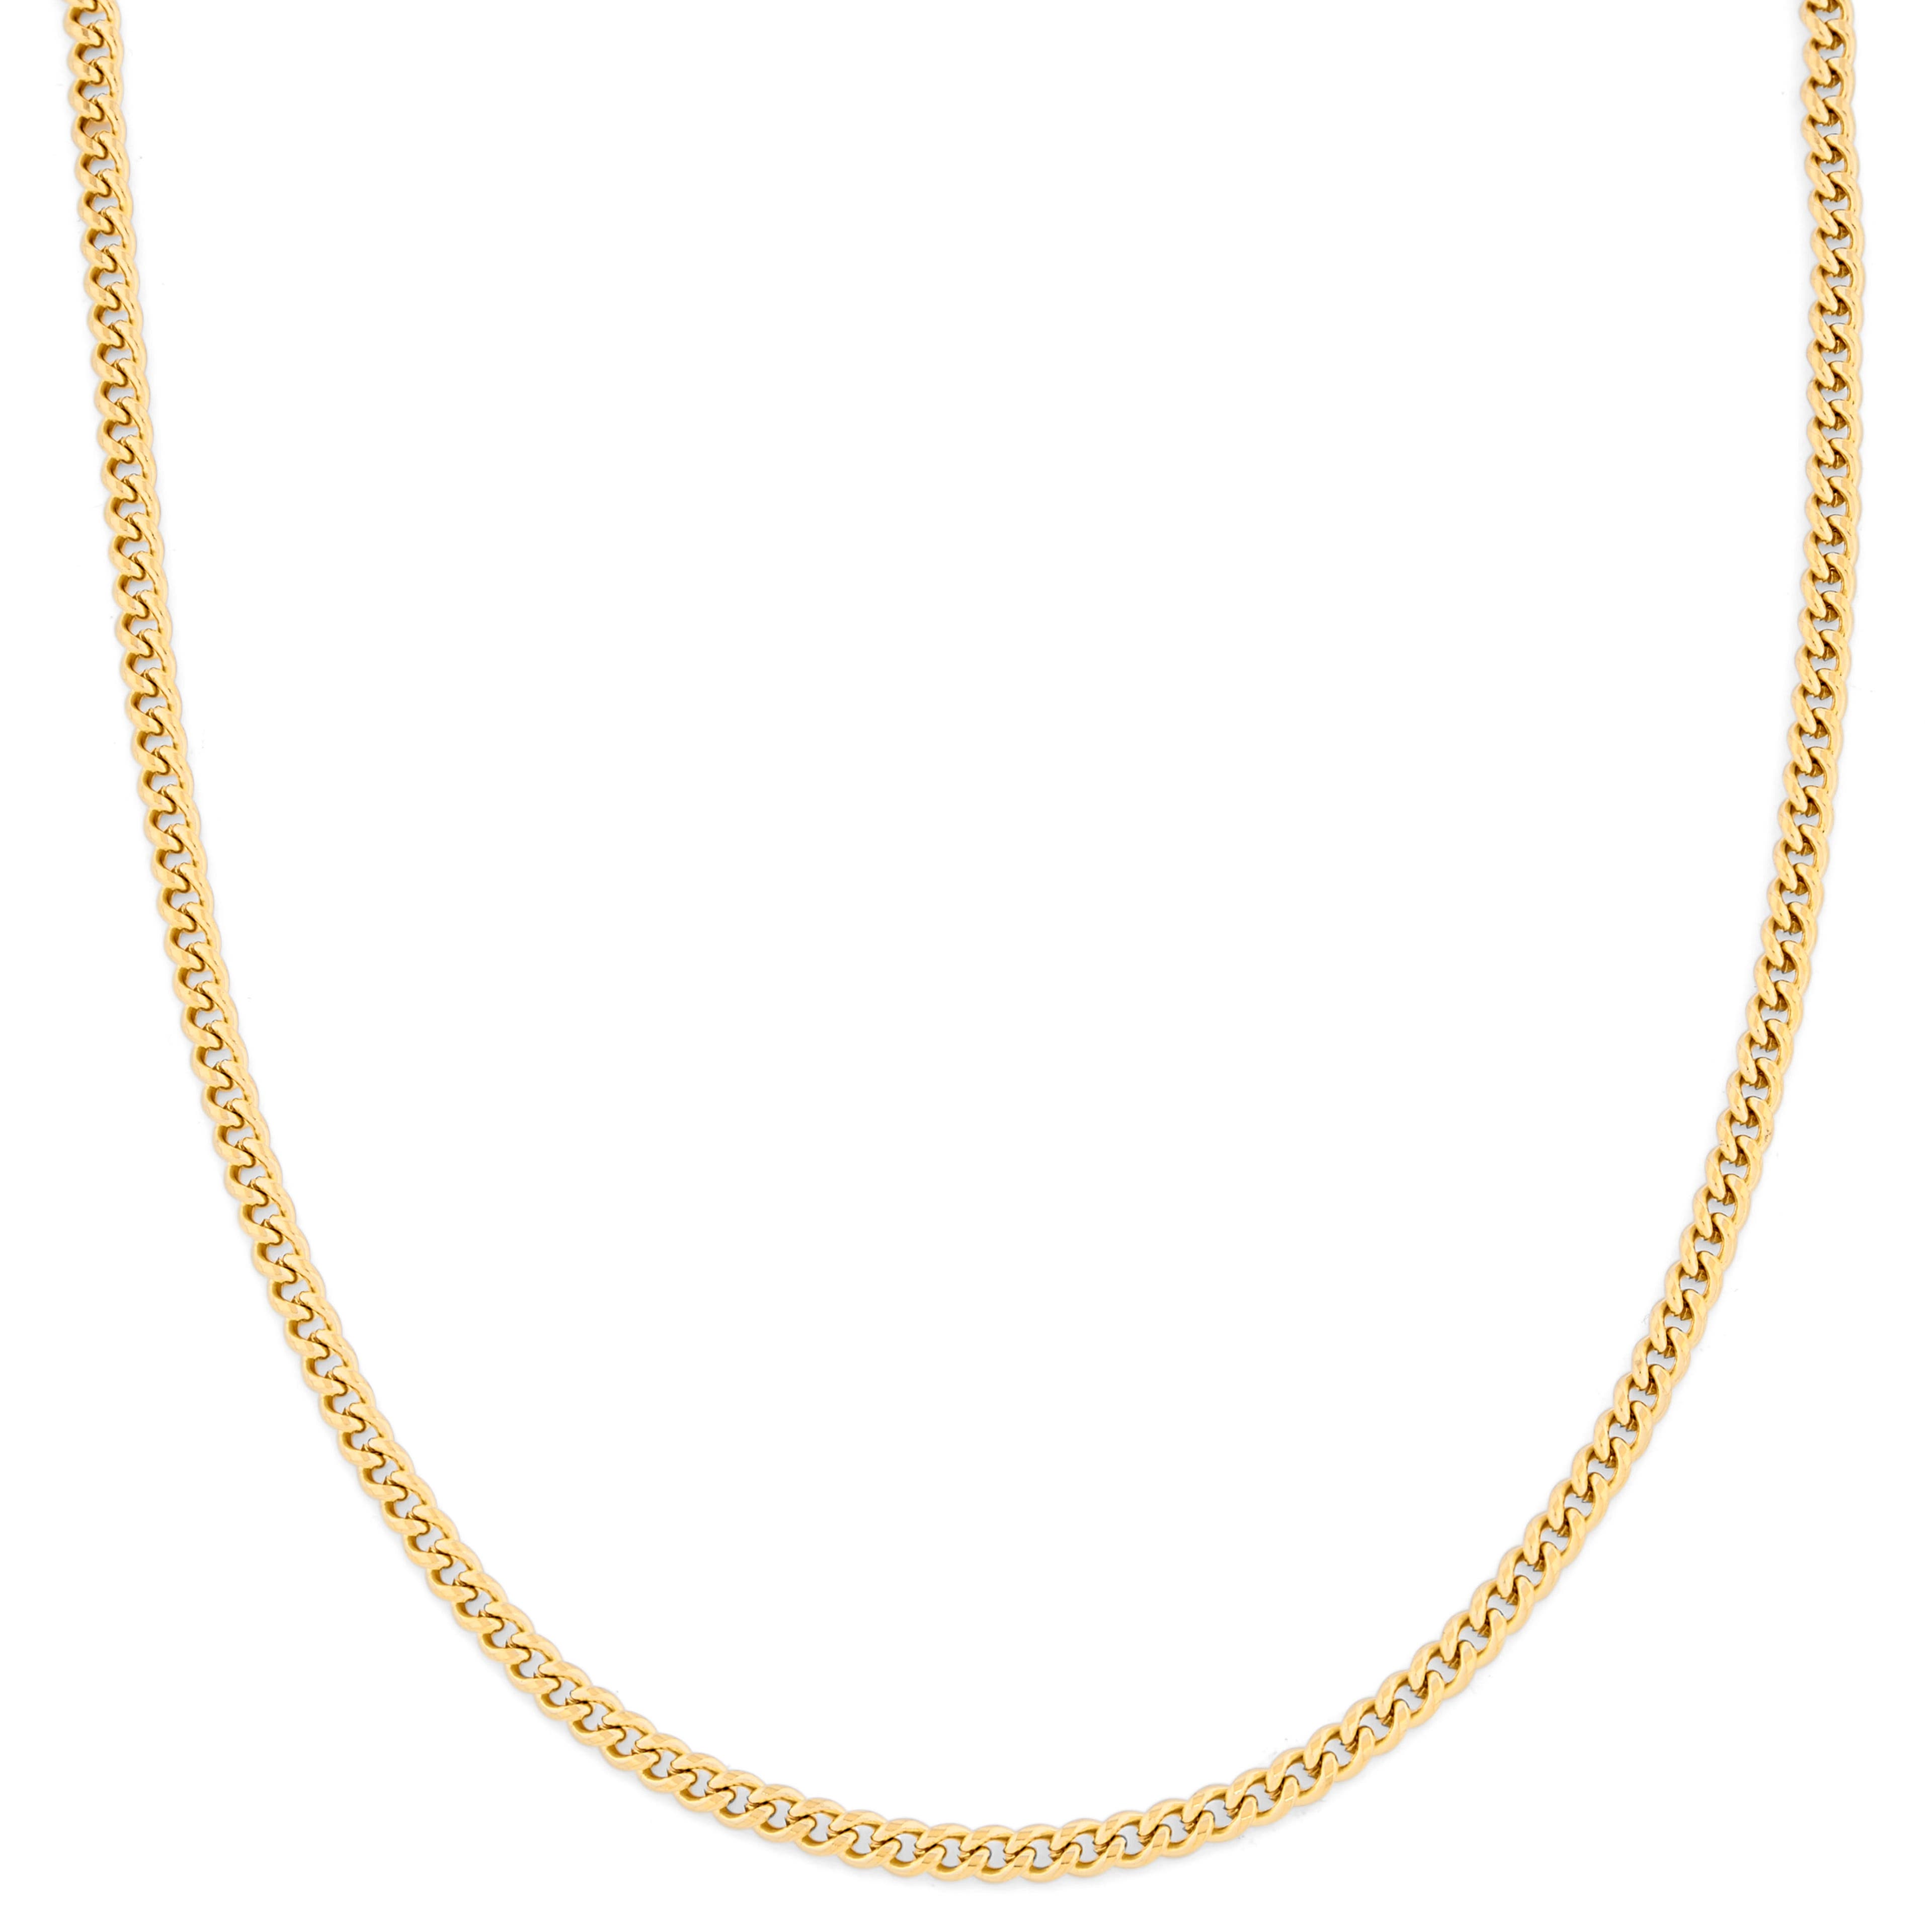 4mm Gold-Tone Chain Necklace